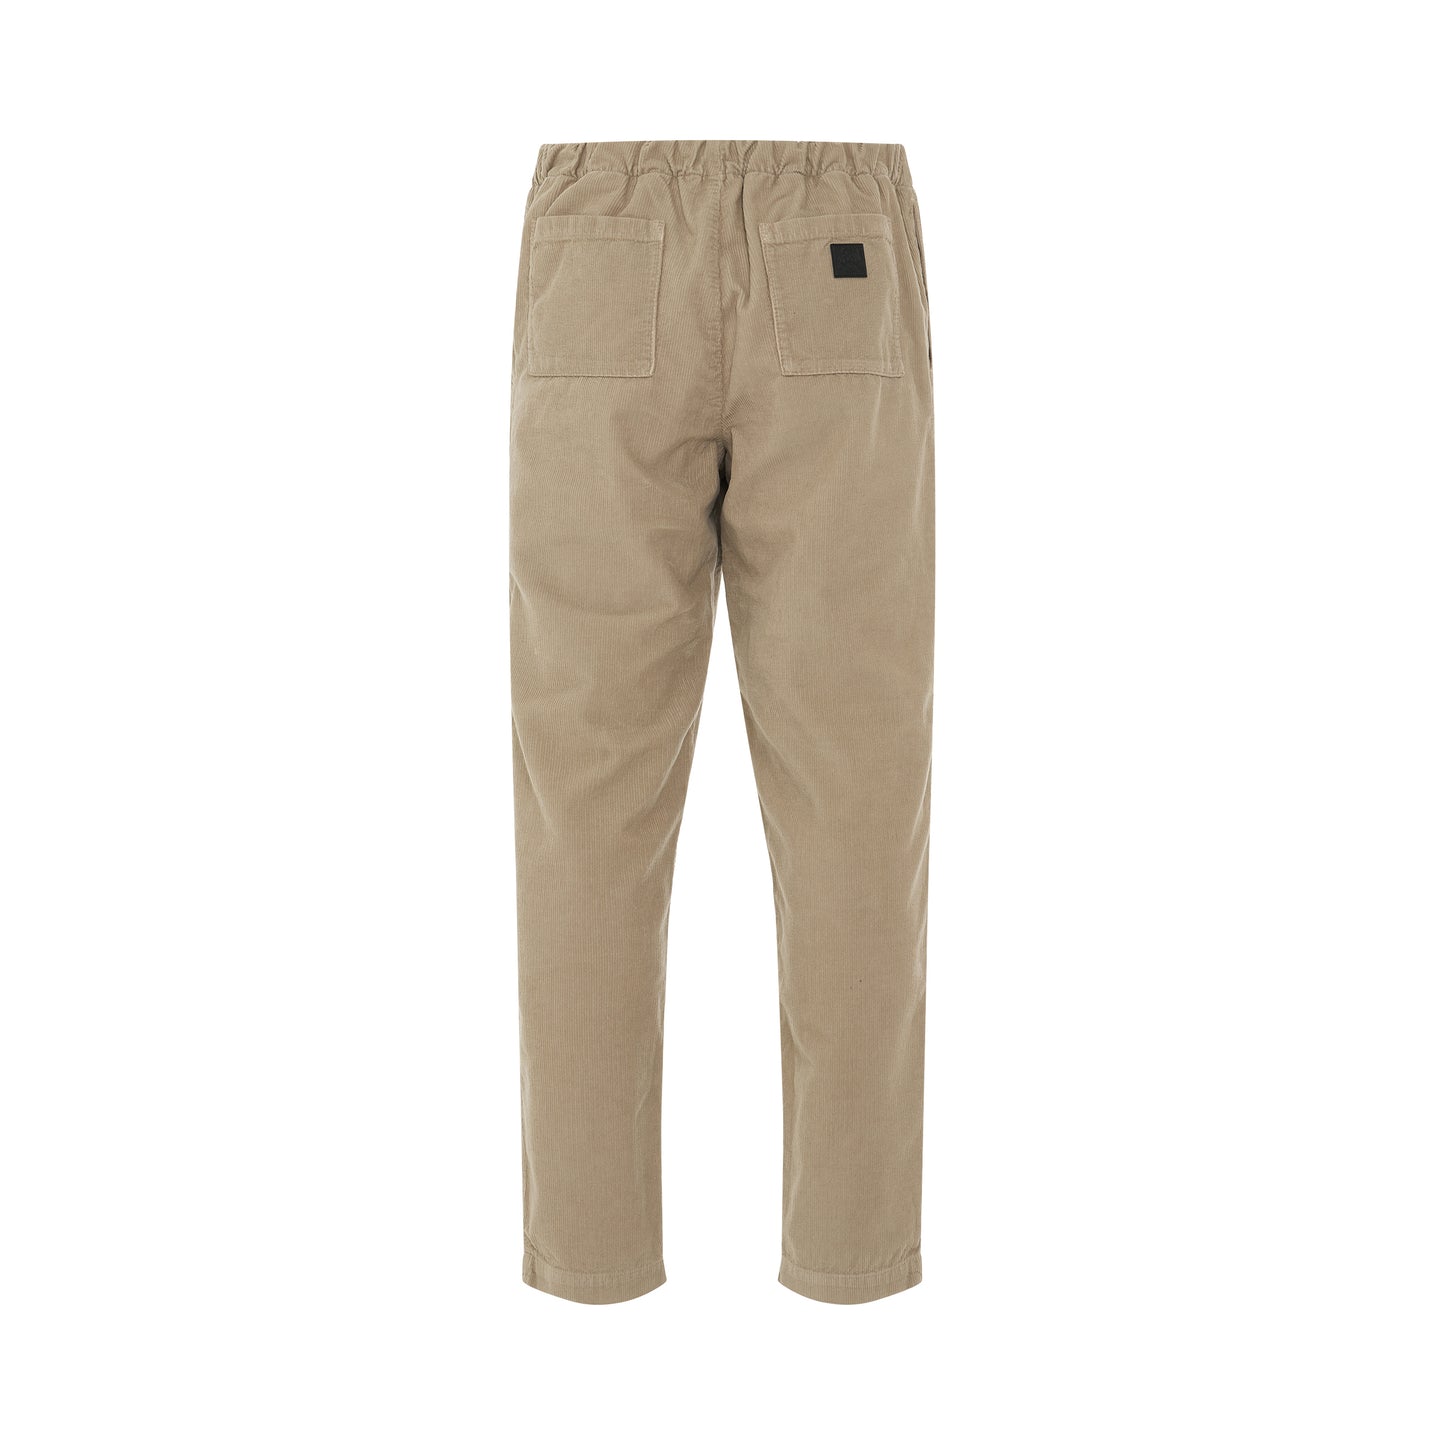 Overdyed Sweat Pant in Sand